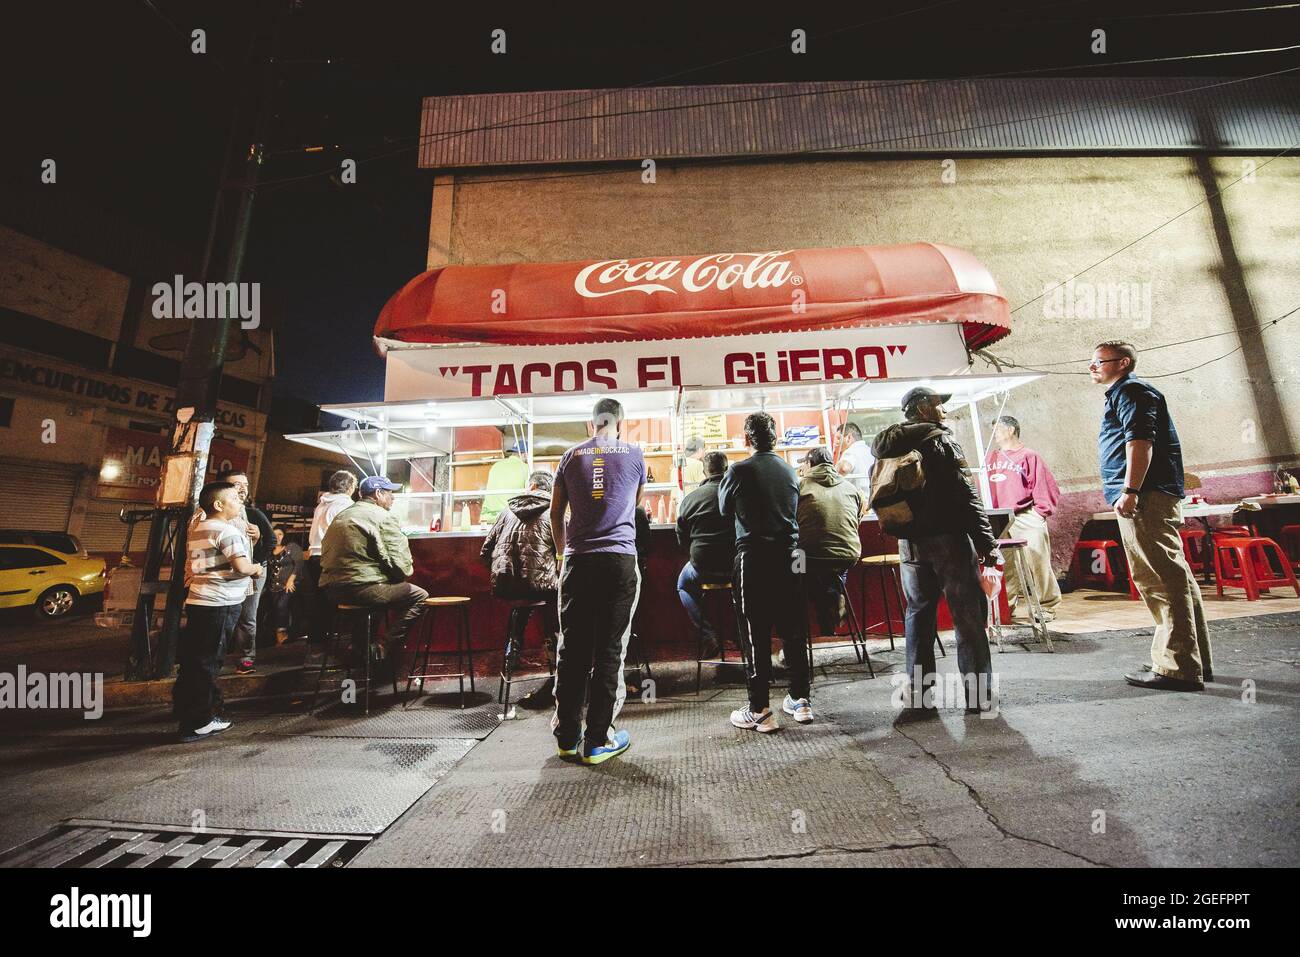 ZACATECAS, MEXICO - Apr 01, 2018: A group of people waiting in line and other people eating at a Mexican street food stall at night in Zacatecas, Mexi Stock Photo